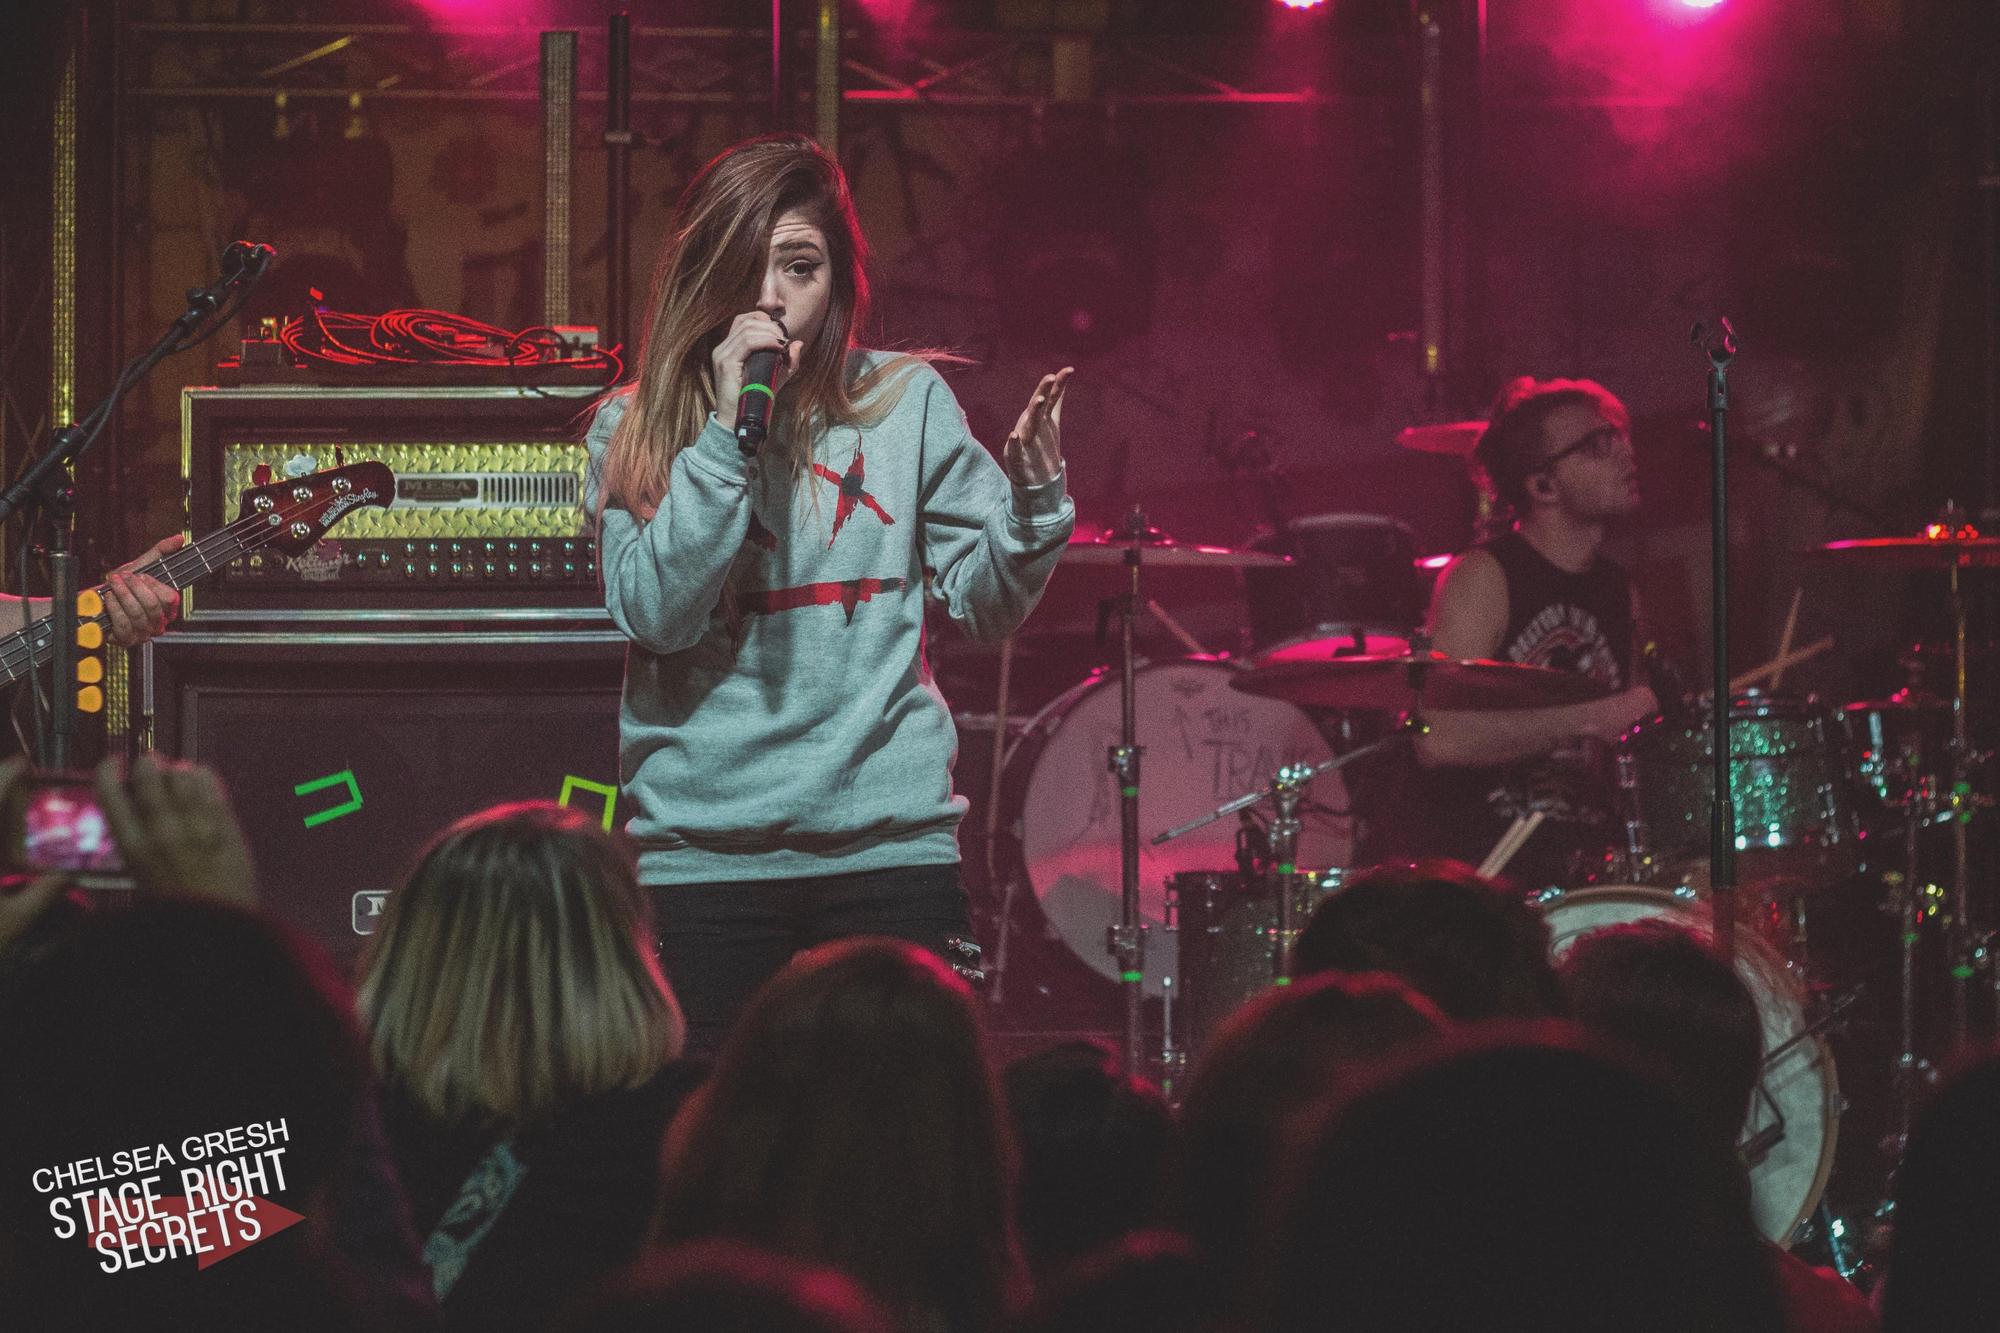 against the current wallpaper,performance,entertainment,performing arts,concert,musician